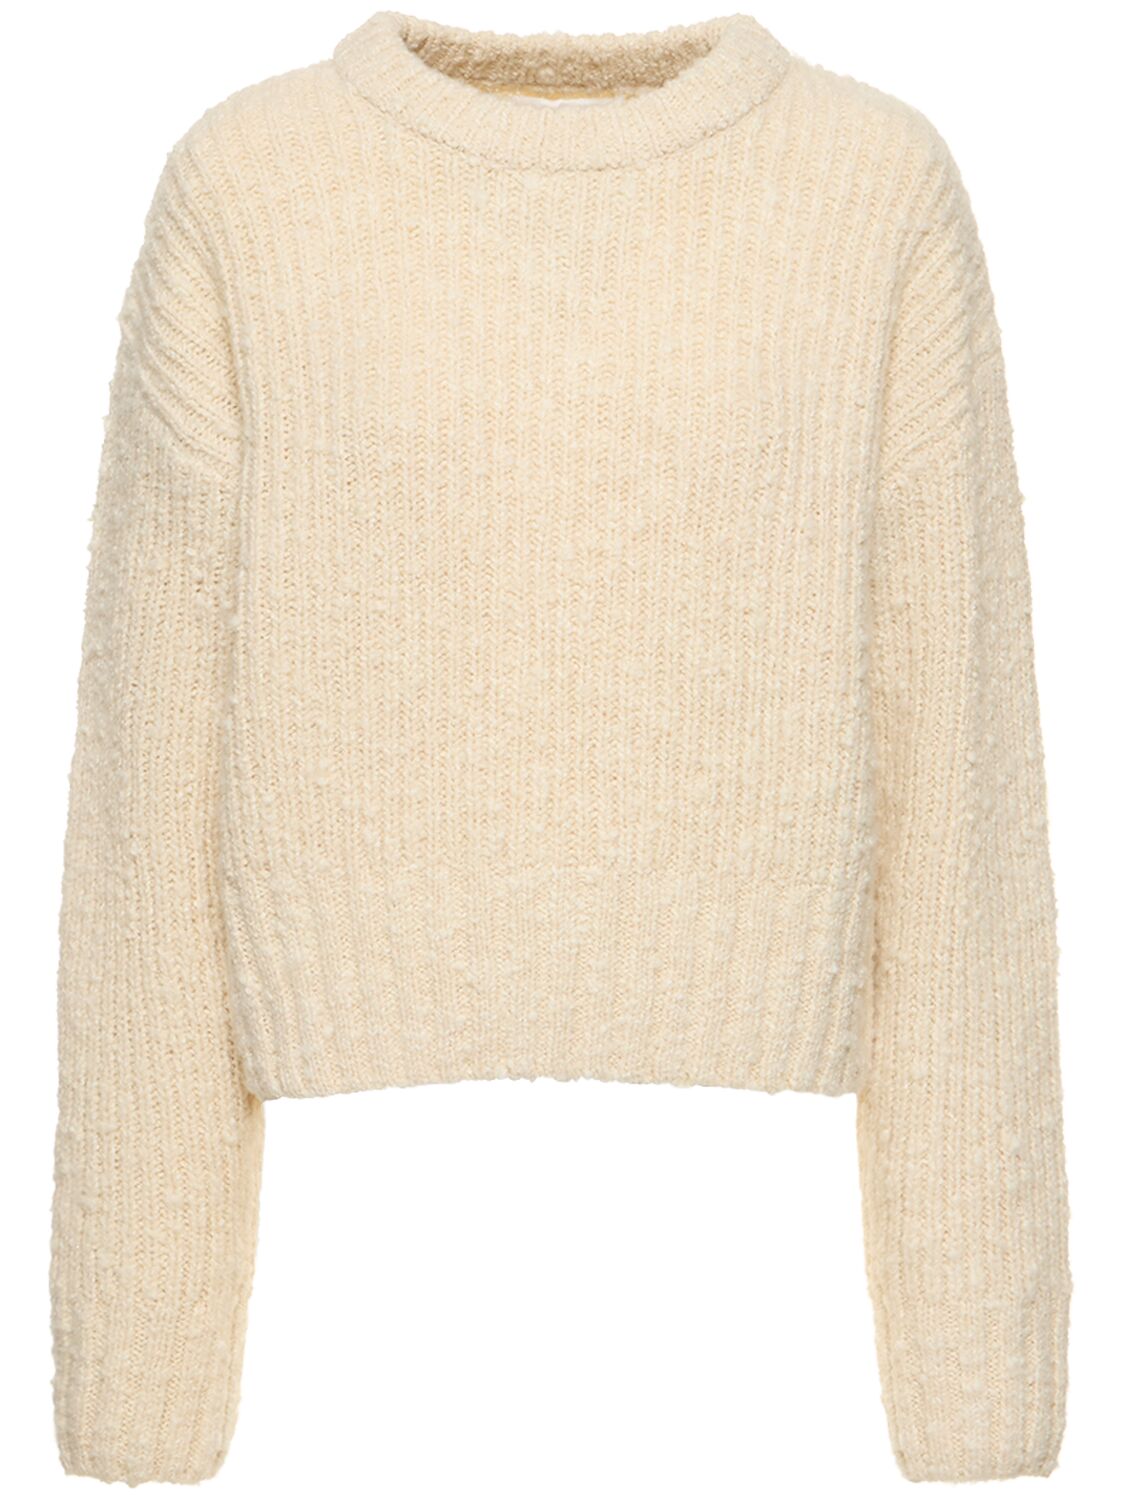 Ami Alexandre Mattiussi Brushed Textured Wool Jumper In Ivory